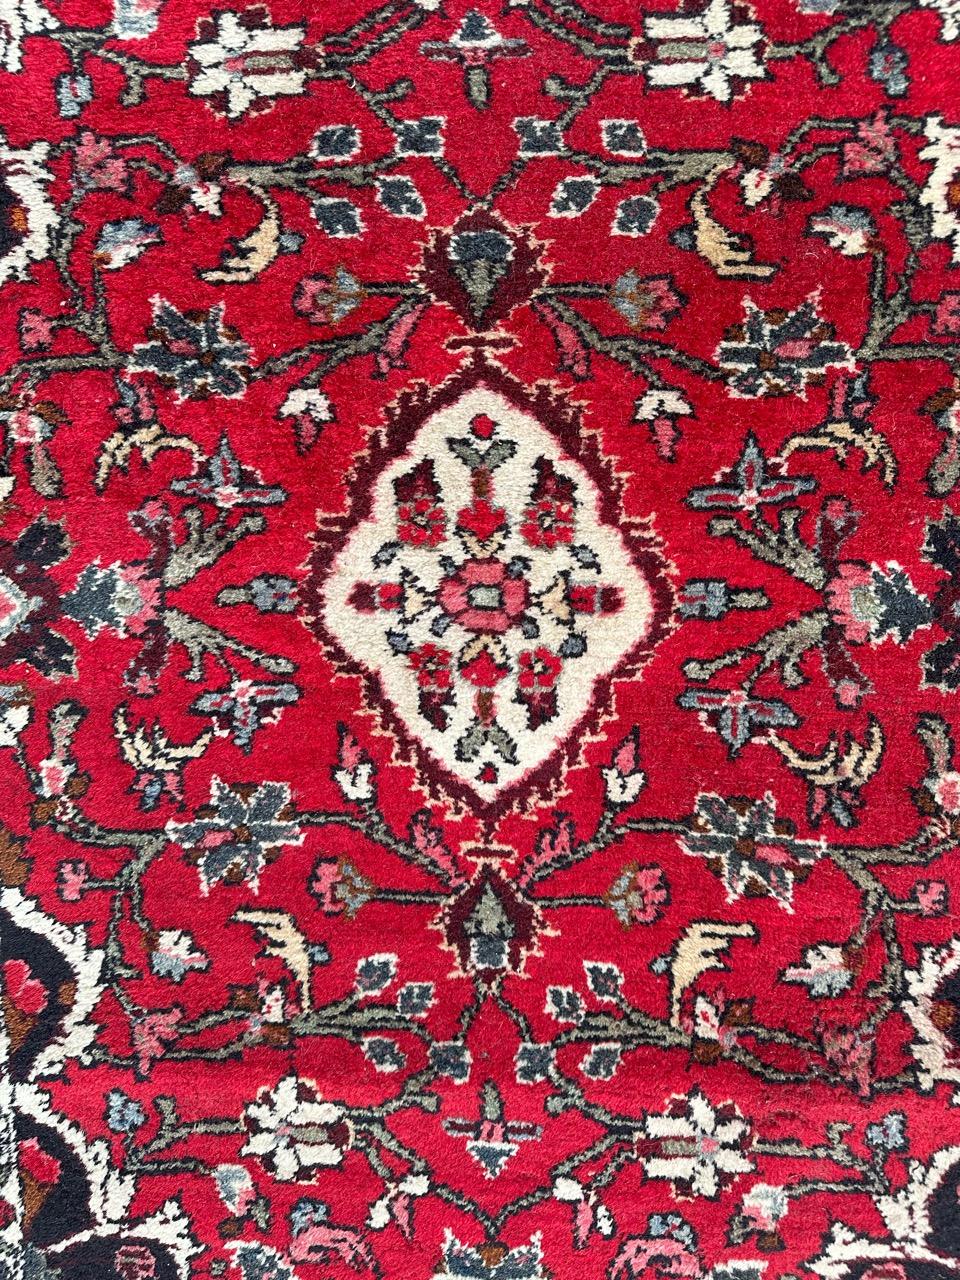 Nice vintage rustic rug with beautiful floral design and nice colours with a red field, entirely hand knotted with wool on cotton foundation.
Little wears at one side!

✨✨✨
